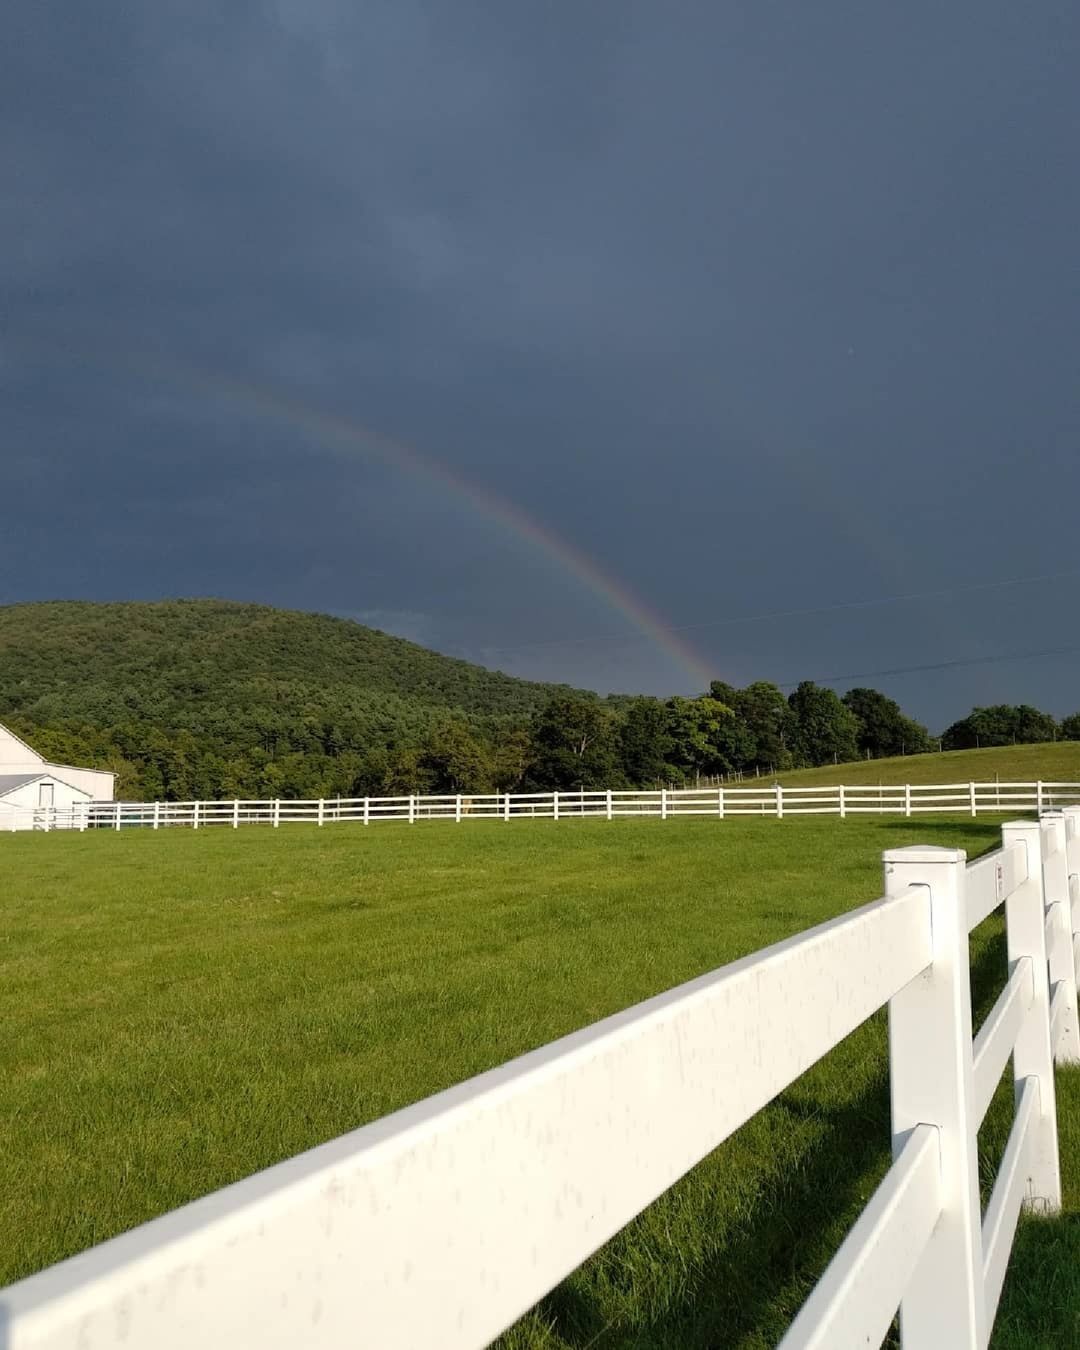 Explore key aspects of #HappyValleyPA's agricultural roots. The heritage here has developed amazing farm markets and farm stands; a thriving craft beverage scene; plentiful farm to fork dining options; opportunities to get up close with native wildlife an